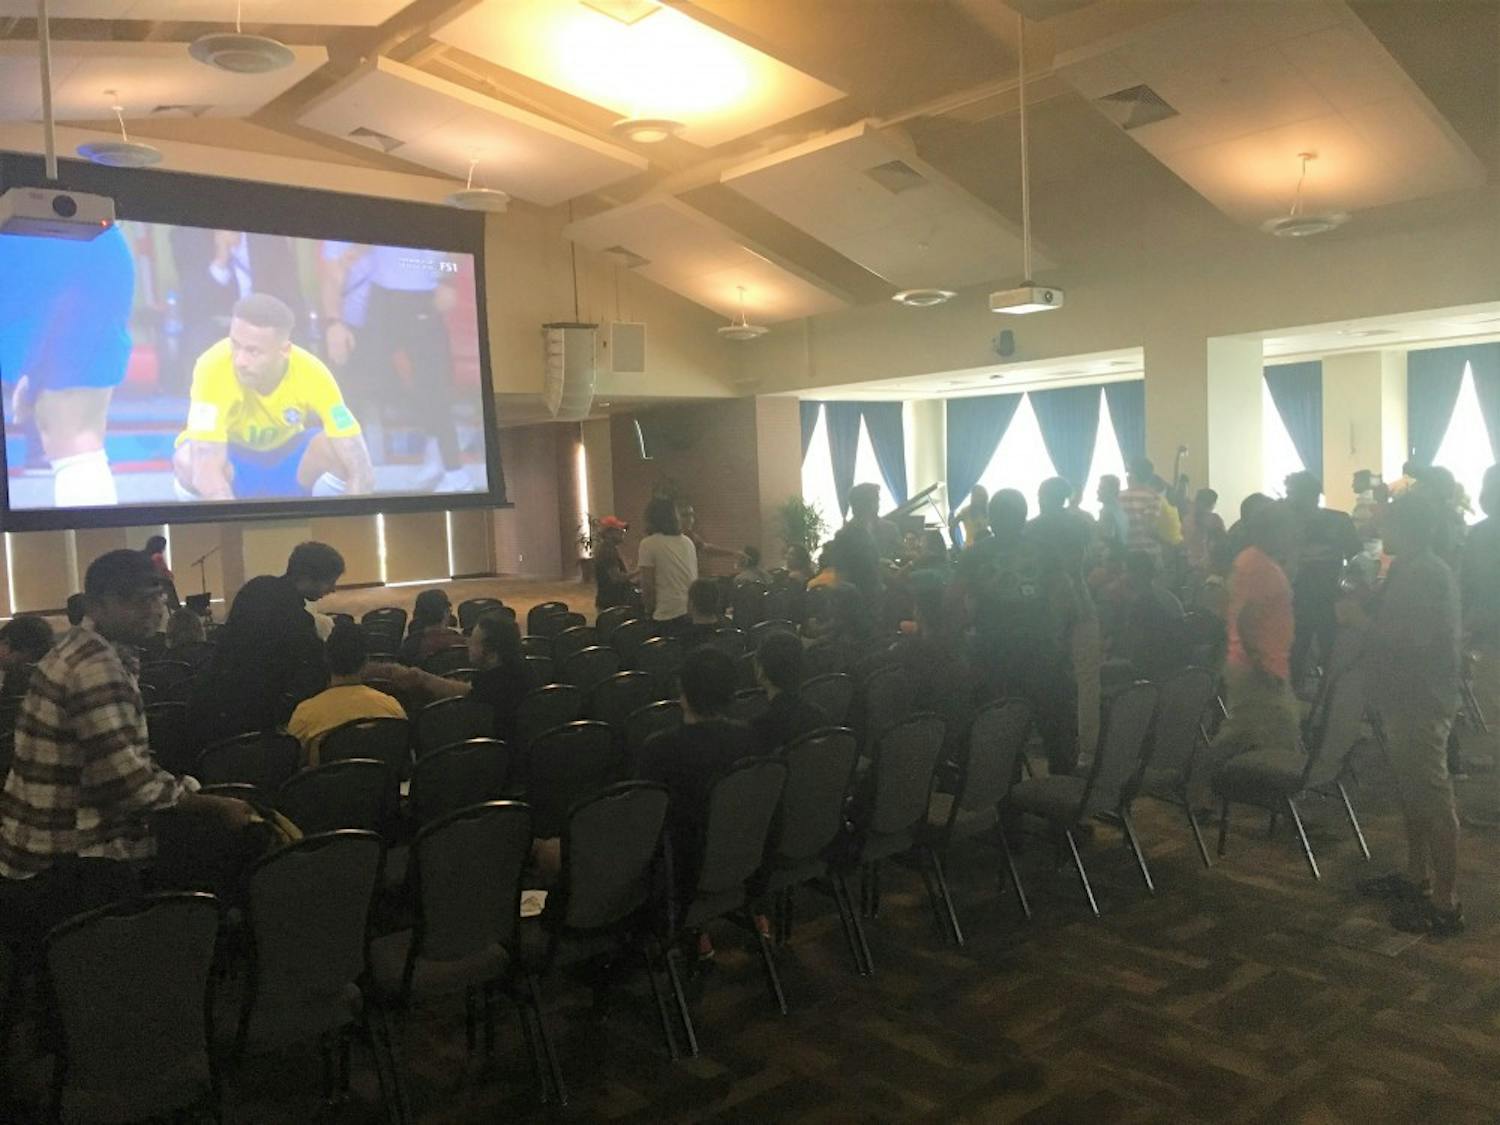 A crowd of students watches the Brazil- Belgium quarter-final match of the Fifa World Cup in the Student Center Ballroom on Friday, July 6, 2018, in Auburn, Ala. 